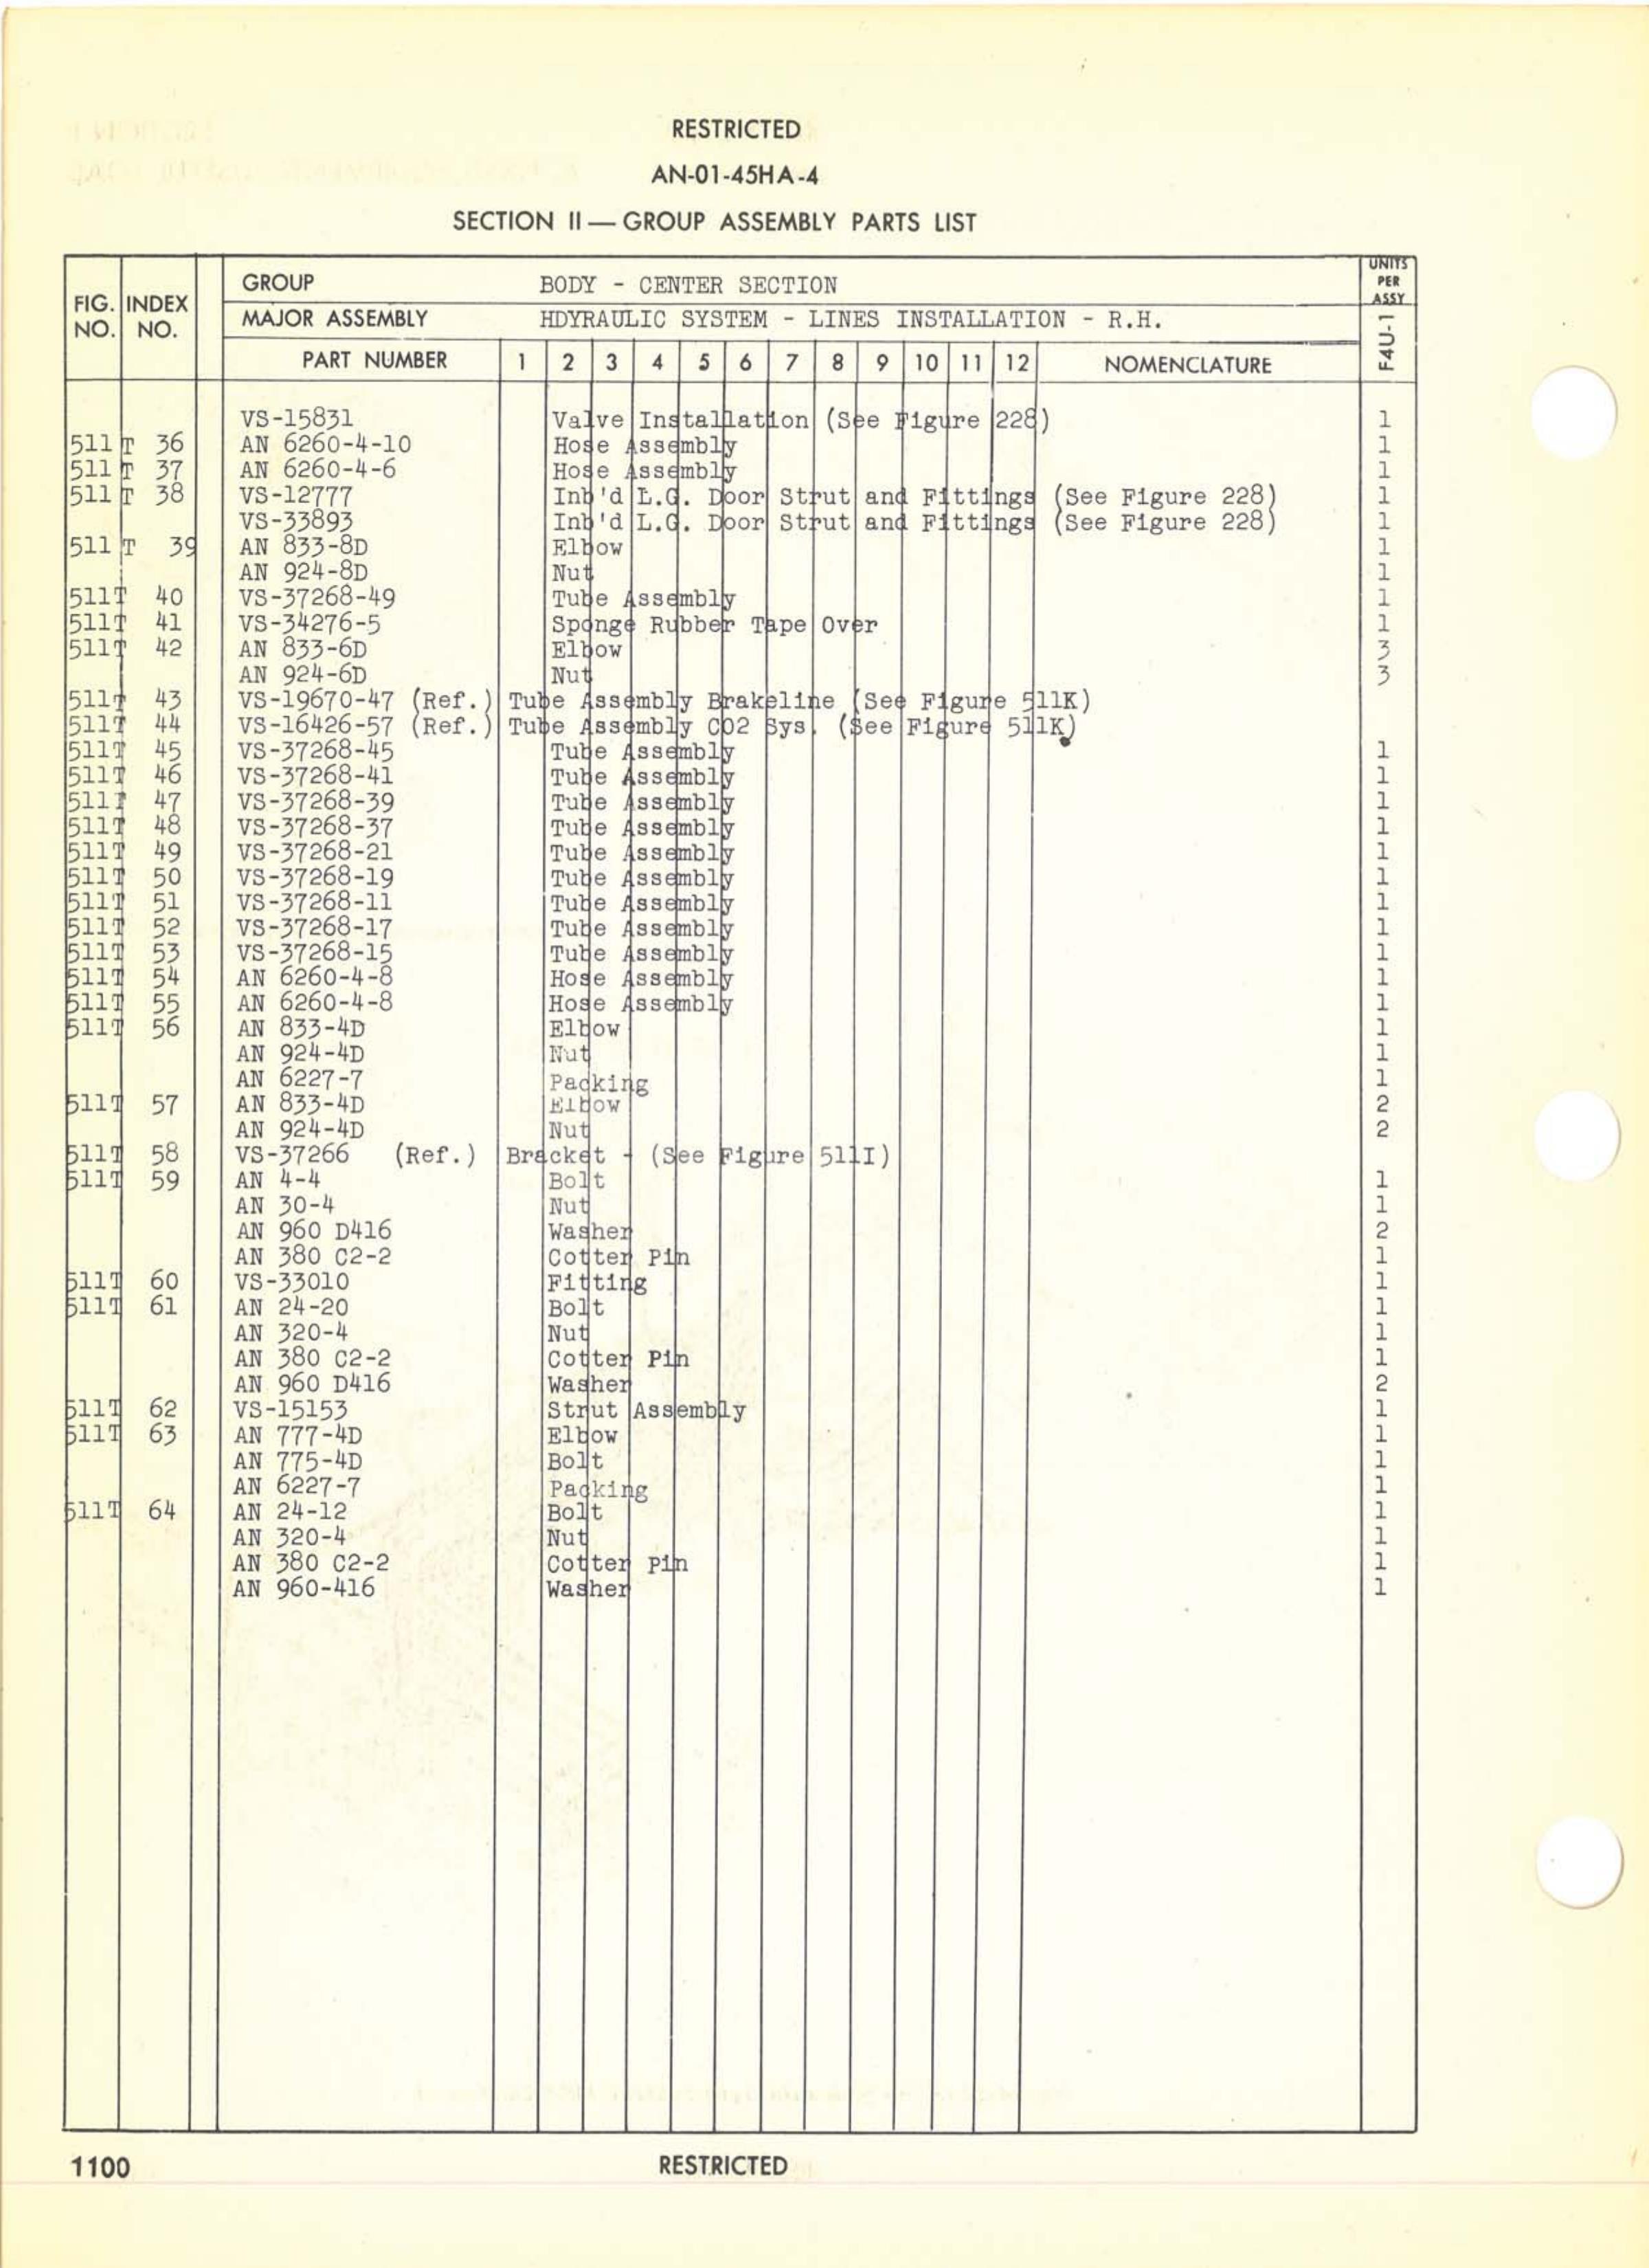 Sample page 1134 from AirCorps Library document: Parts Catalog - F4U-1, F3A-1, FG-1